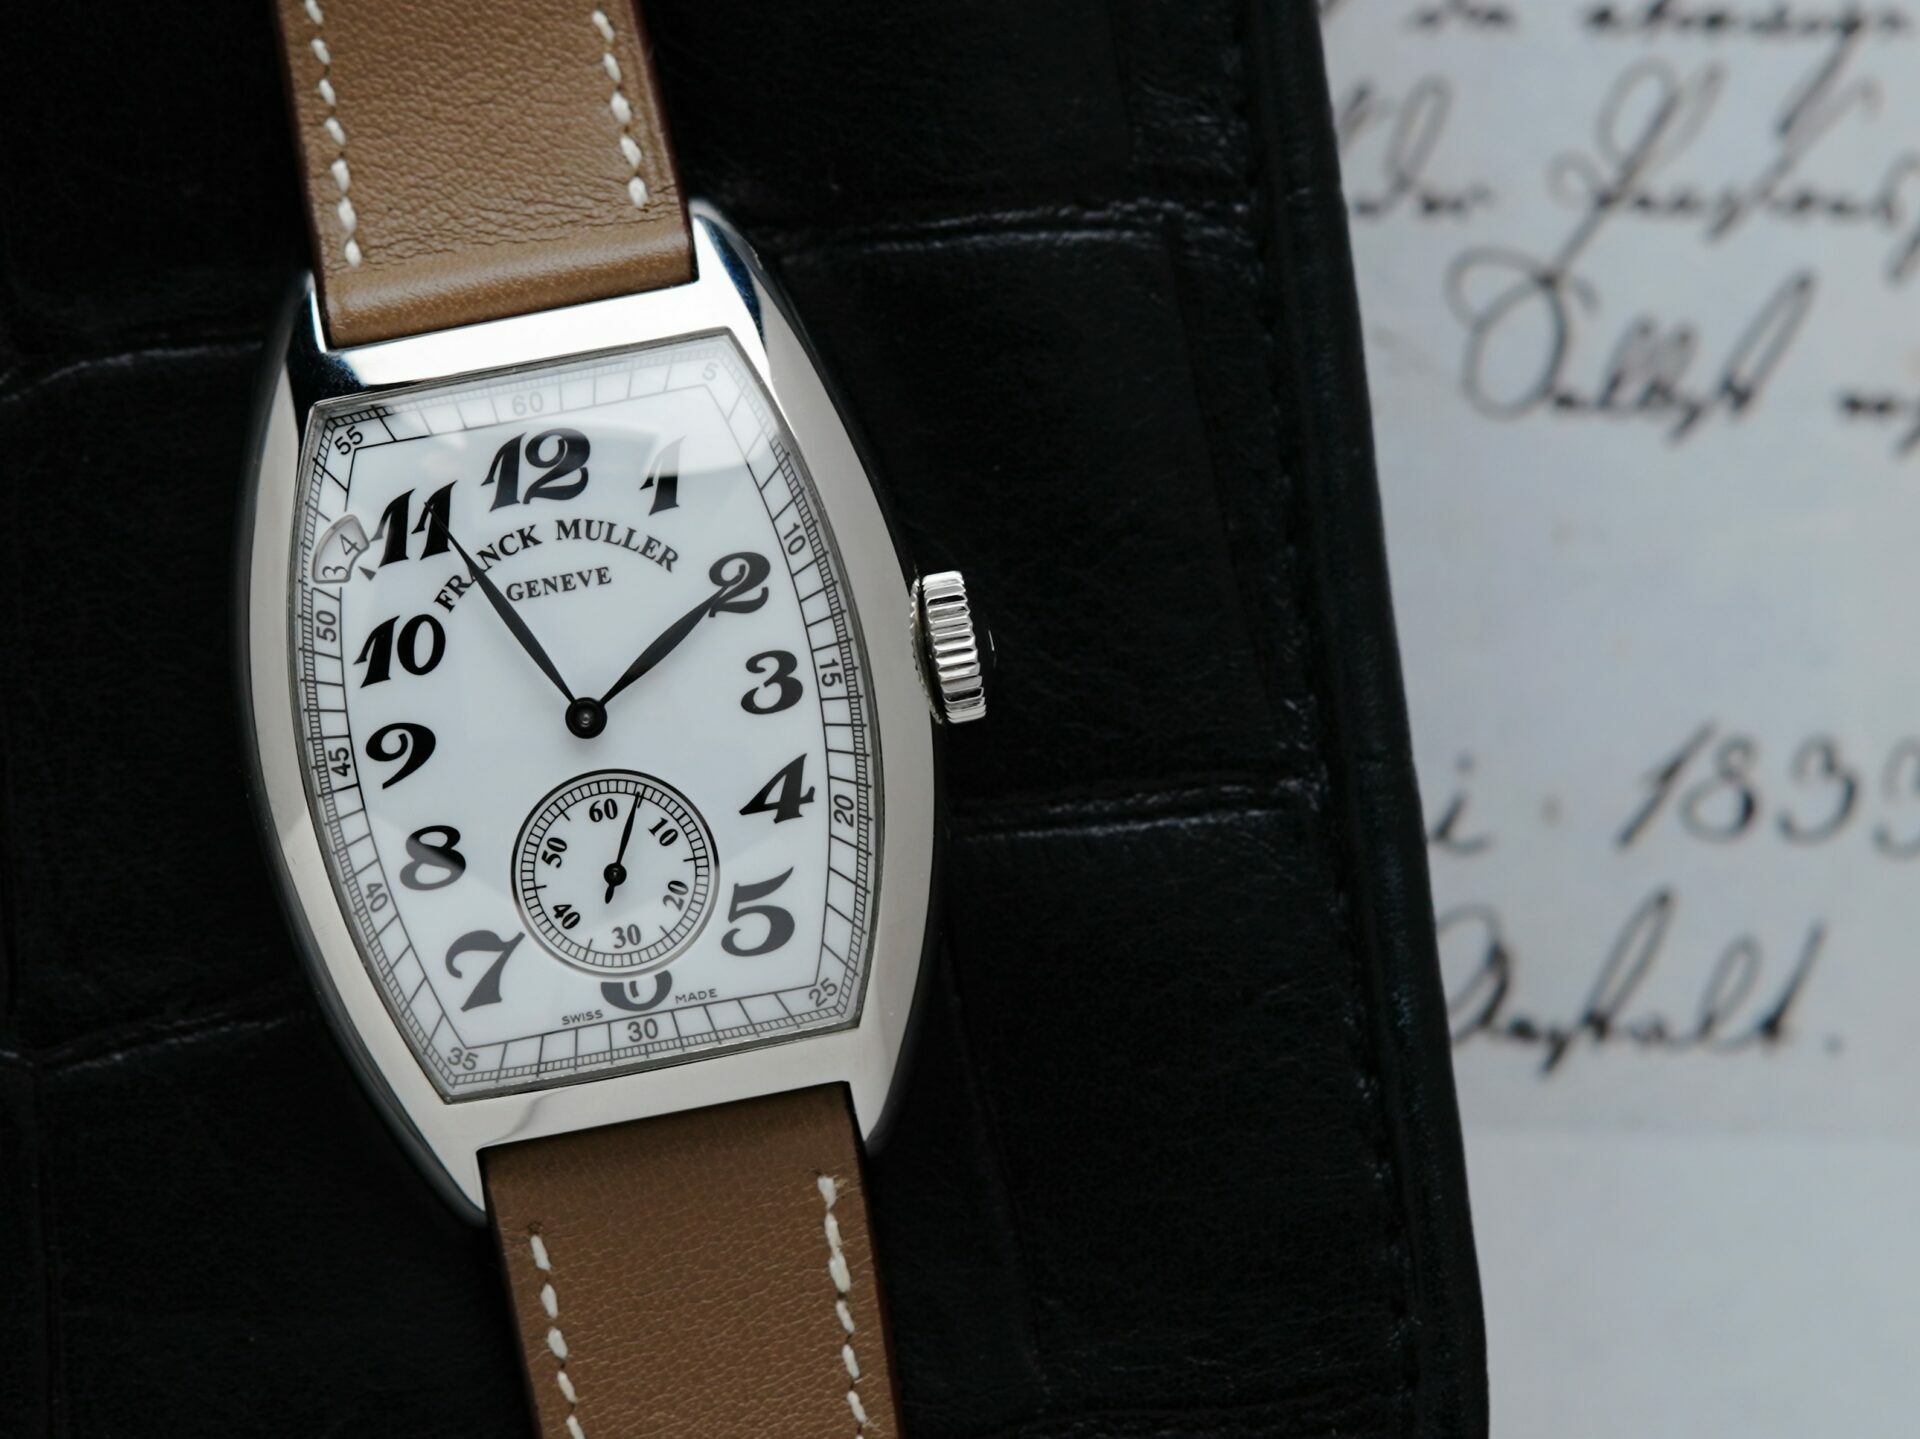 Franck Muller Vintage Curvex 7 Day Reserve watch with paper document in background.